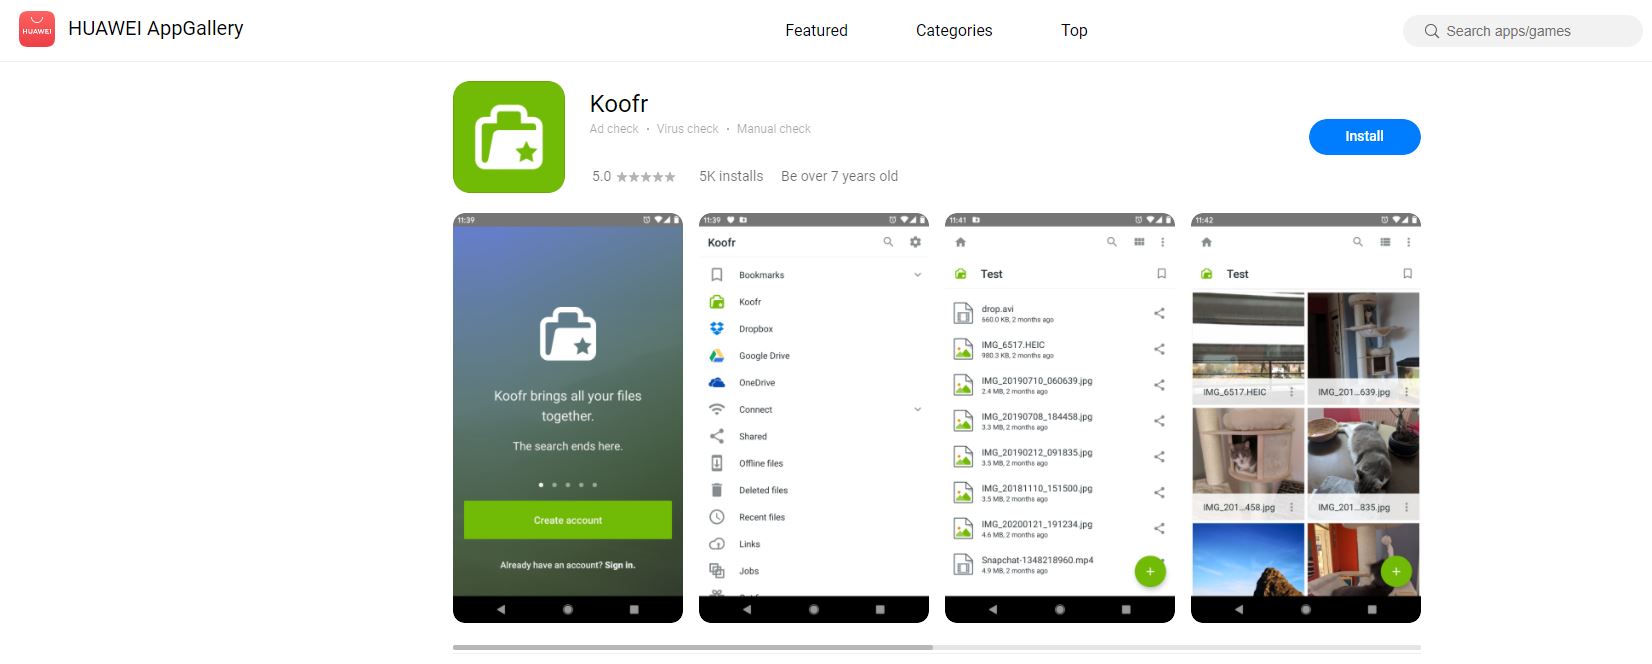 The Koofr app is now available on the Huawei AppGallery.